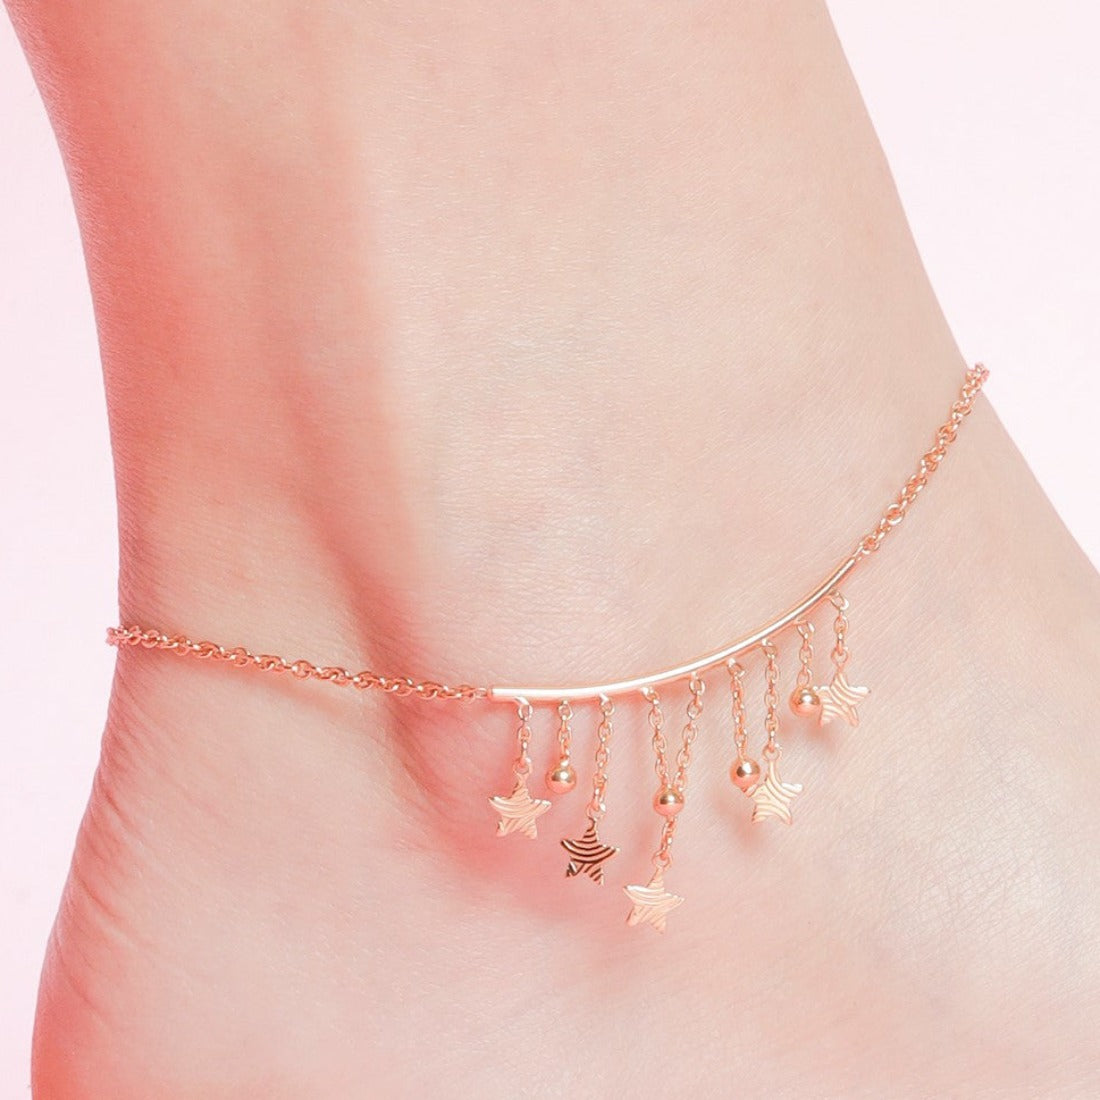 Hanging Stars Rose Gold Plated 925 Sterling Silver Chained Anklet